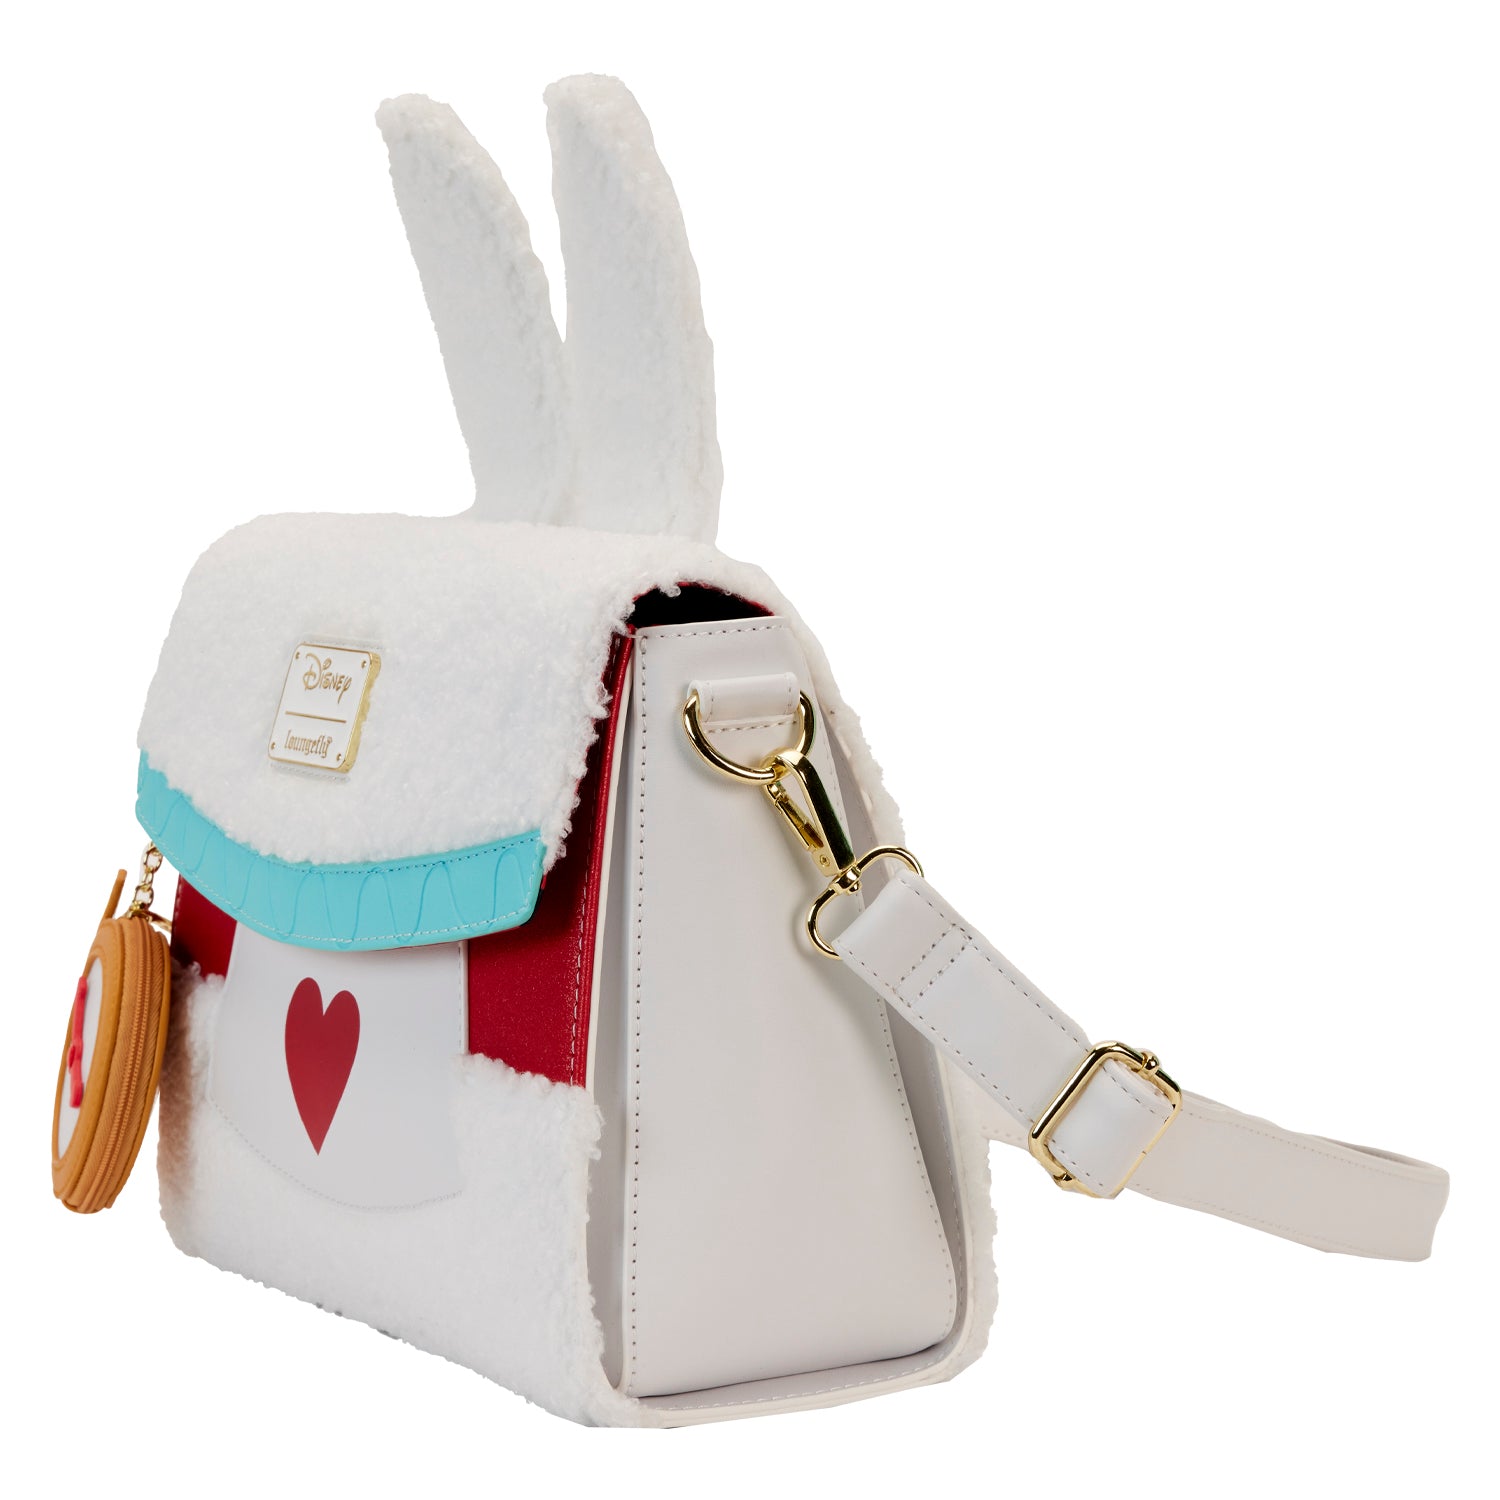 Loungefly Disney Alice in Wonderland Backpack with Detachable Wristlet